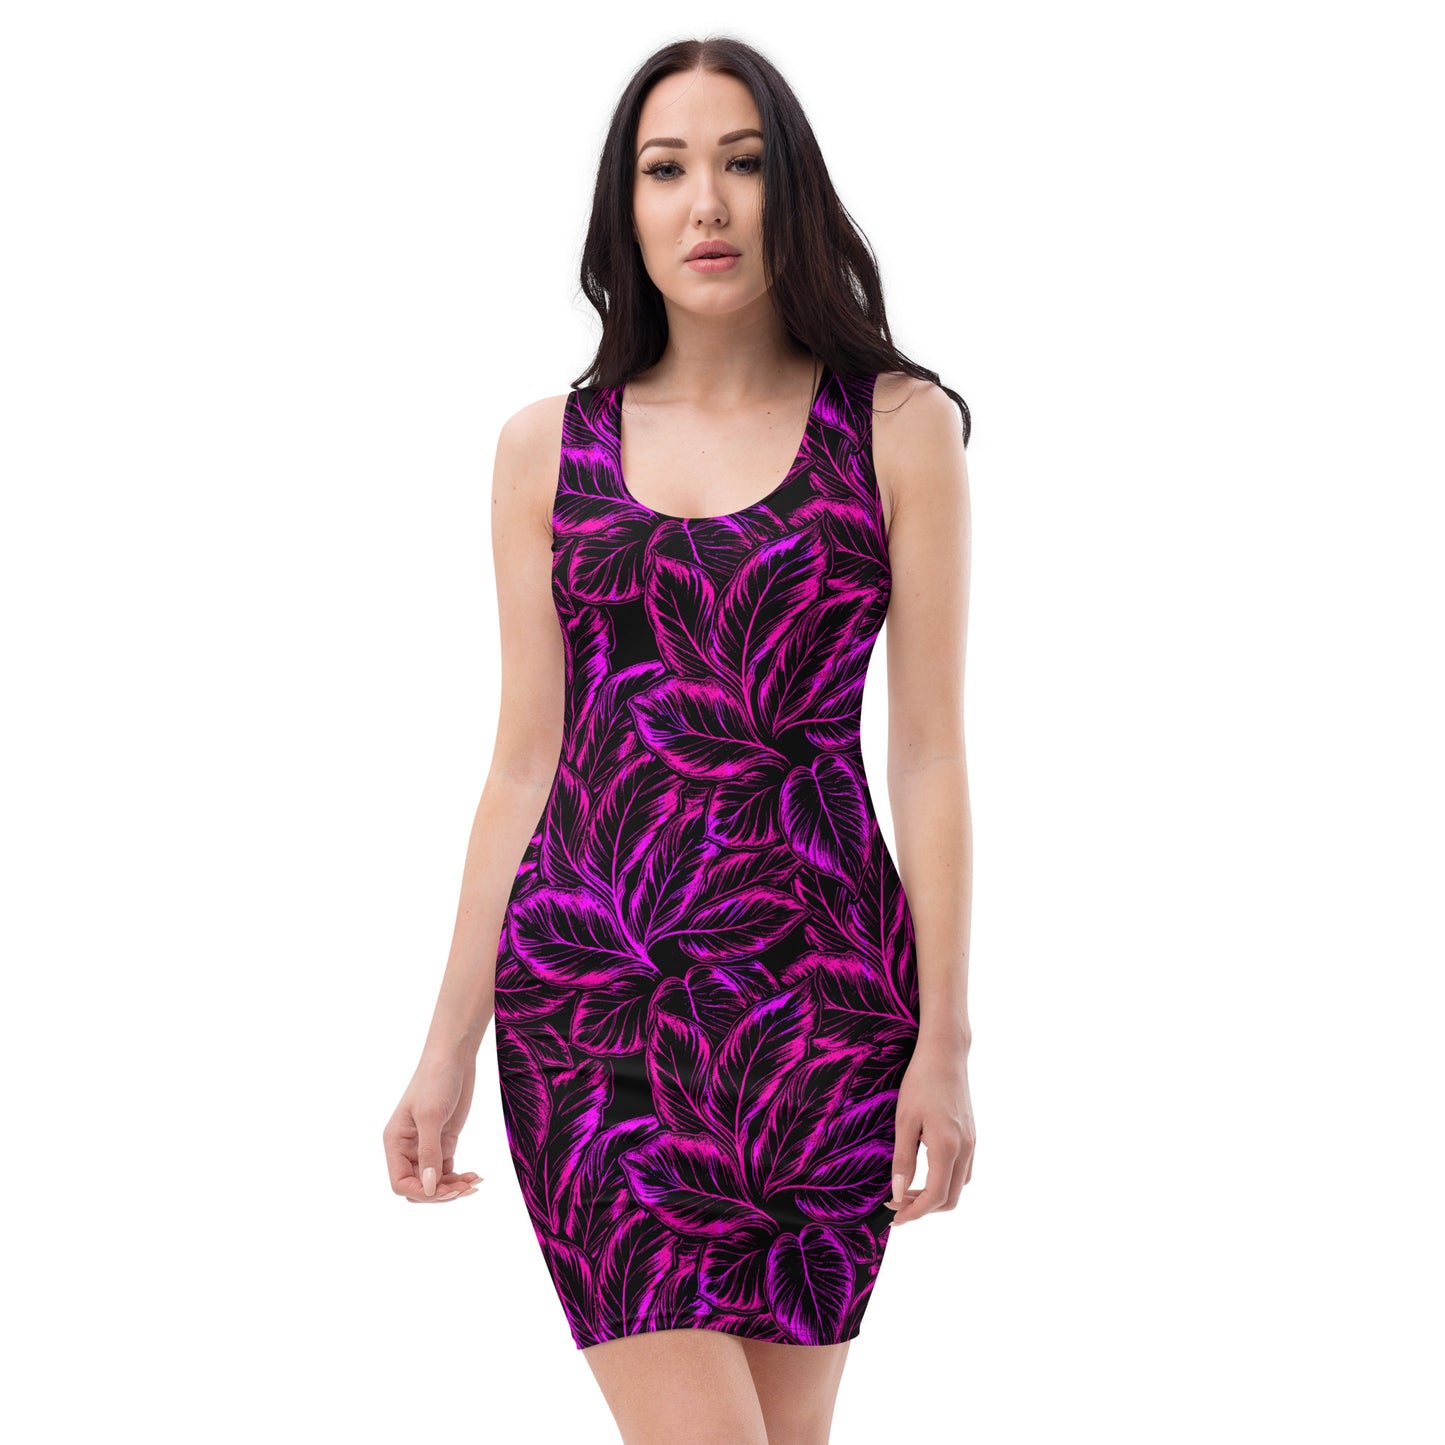 Calathea Couture Pink and Purple Bodycon dress